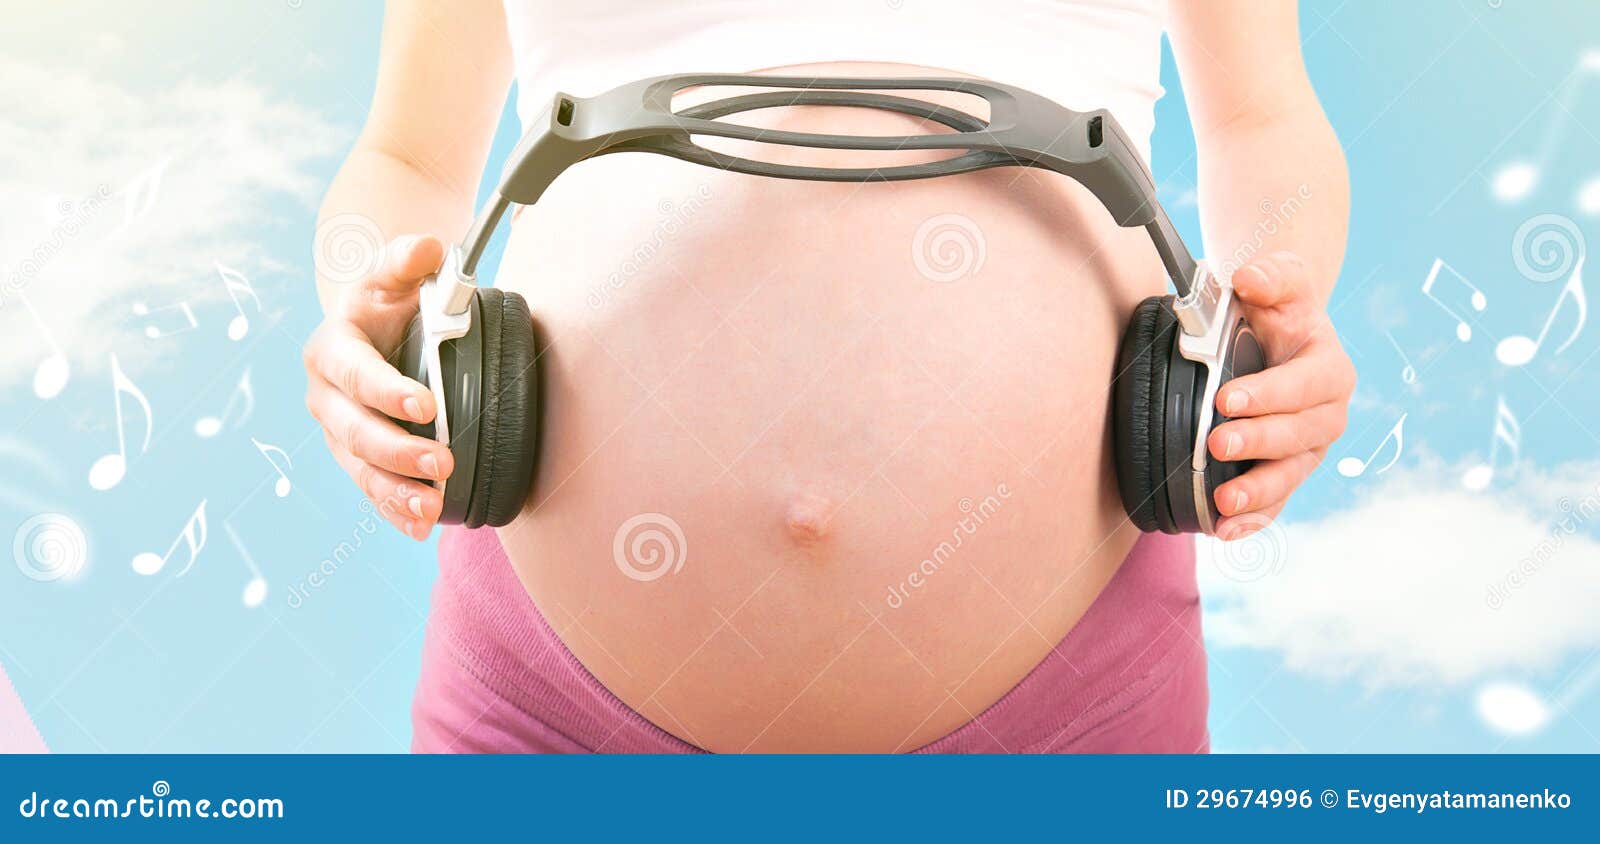 Pregnant woman listens to music on headphones, gently caresses her belly  thinking about her baby, enjoying her pregnancy 24697149 Stock Photo at  Vecteezy